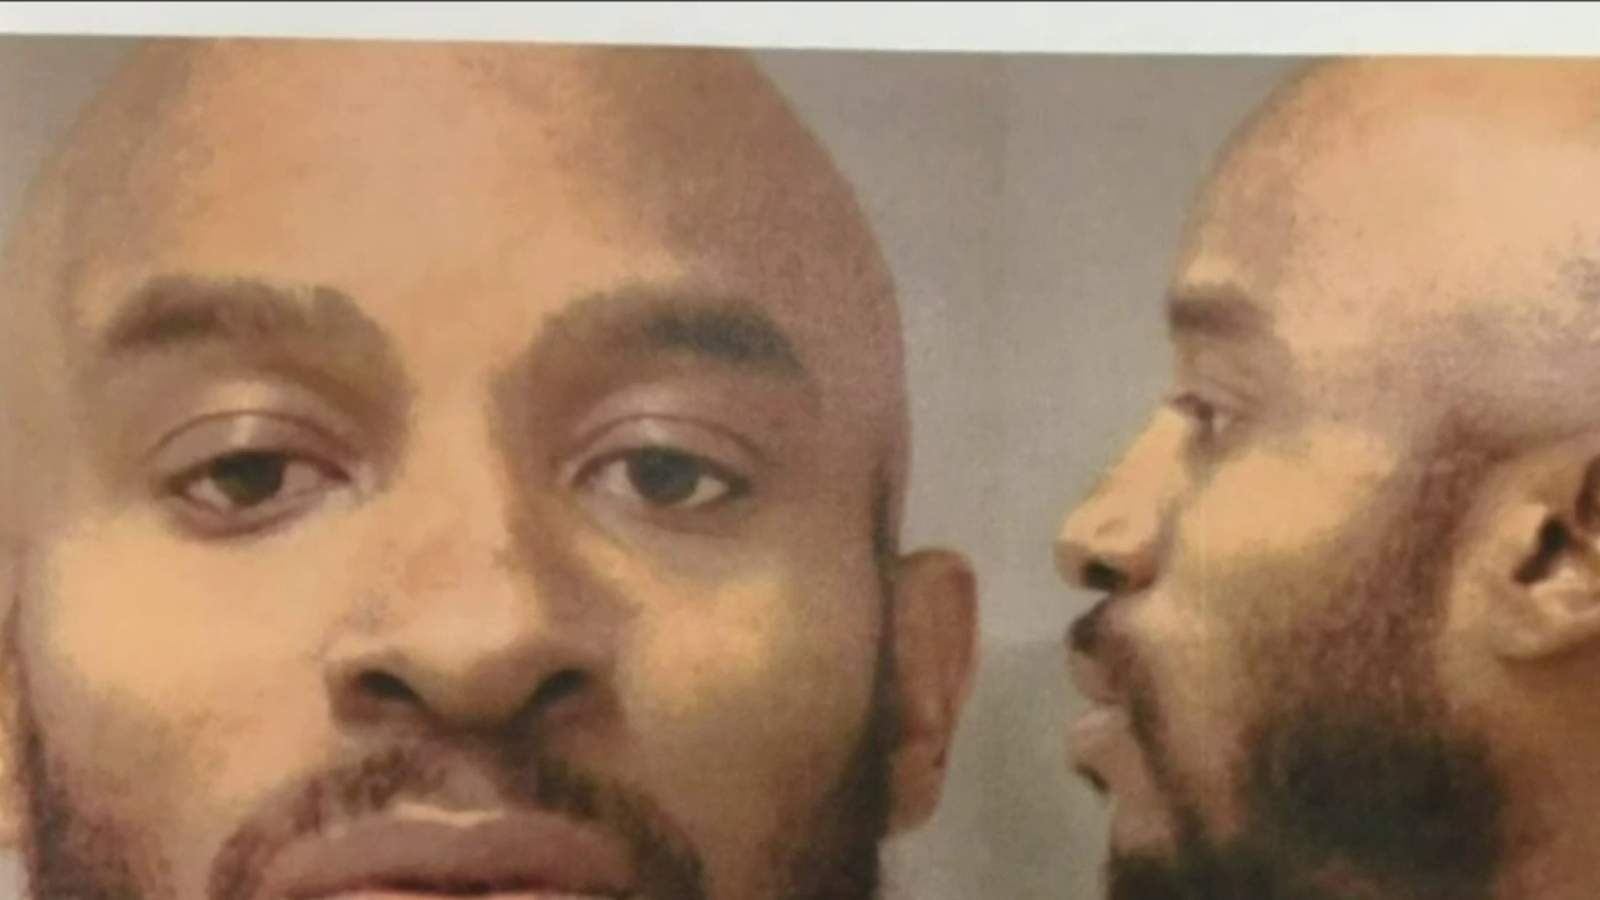 Federal, local authorities search for man connected to 6 Metro Detroit homicides